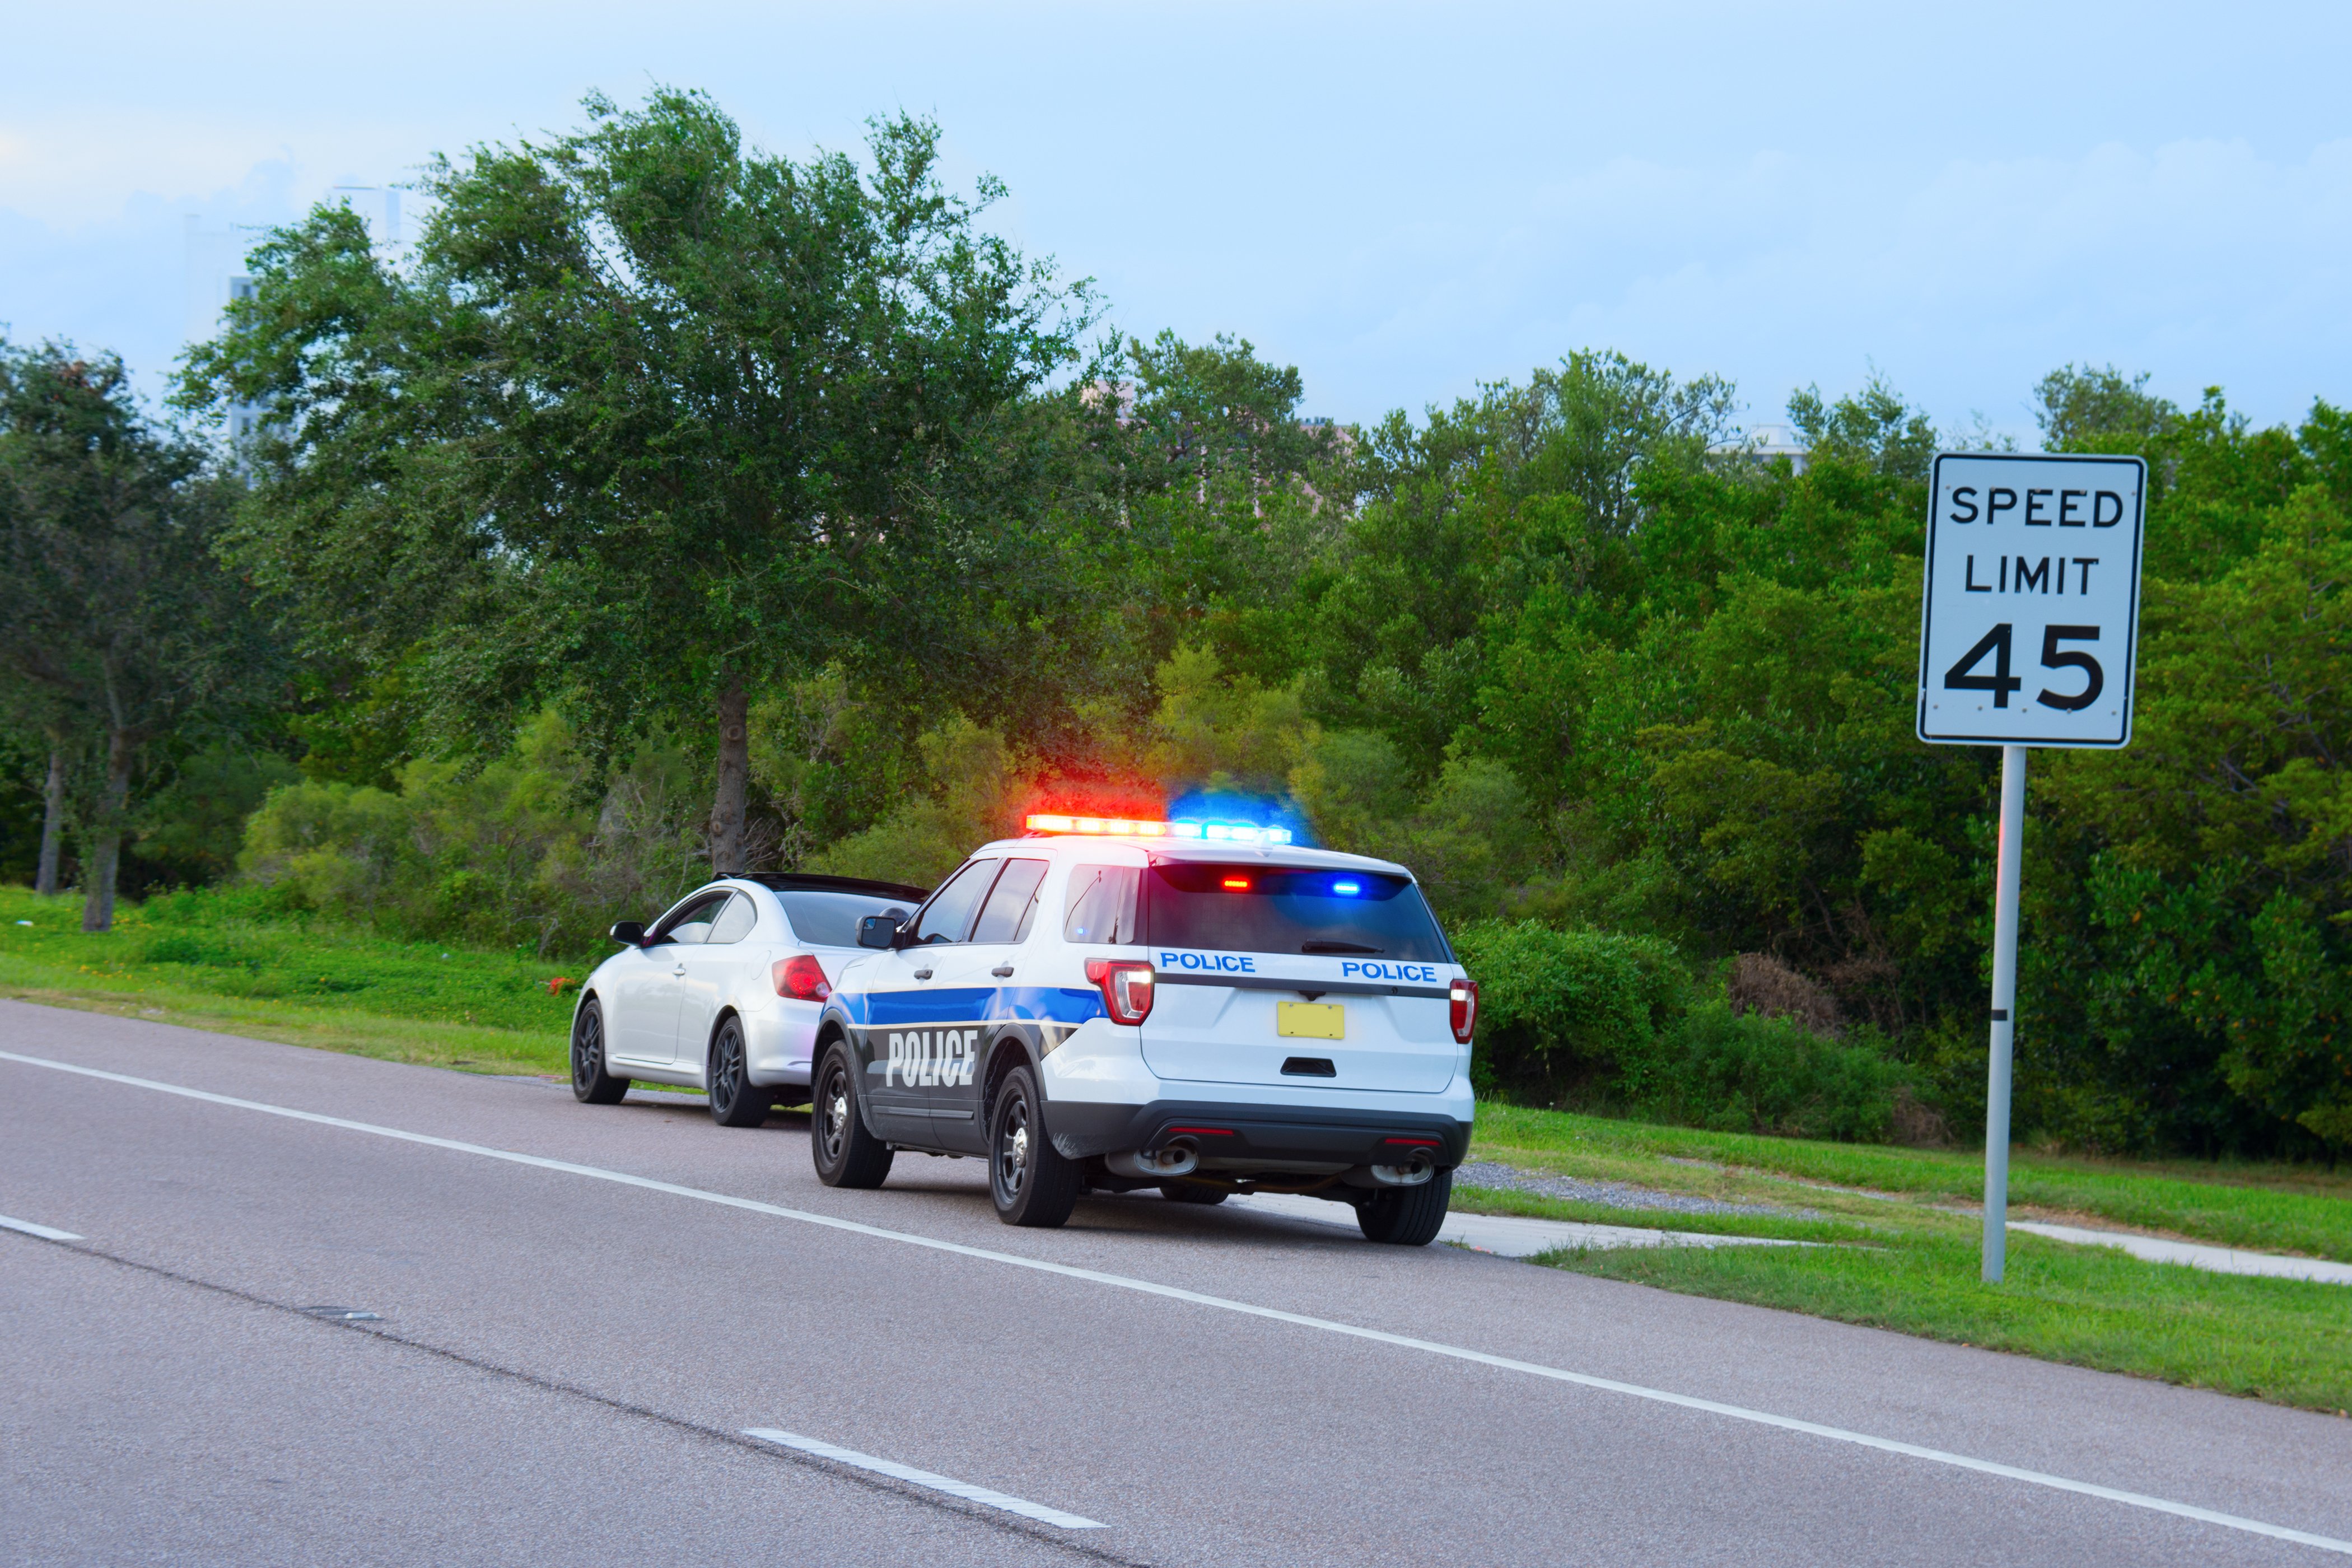 A police vehicle pulling over a car on the side of the road. | Photo: Shutterstock